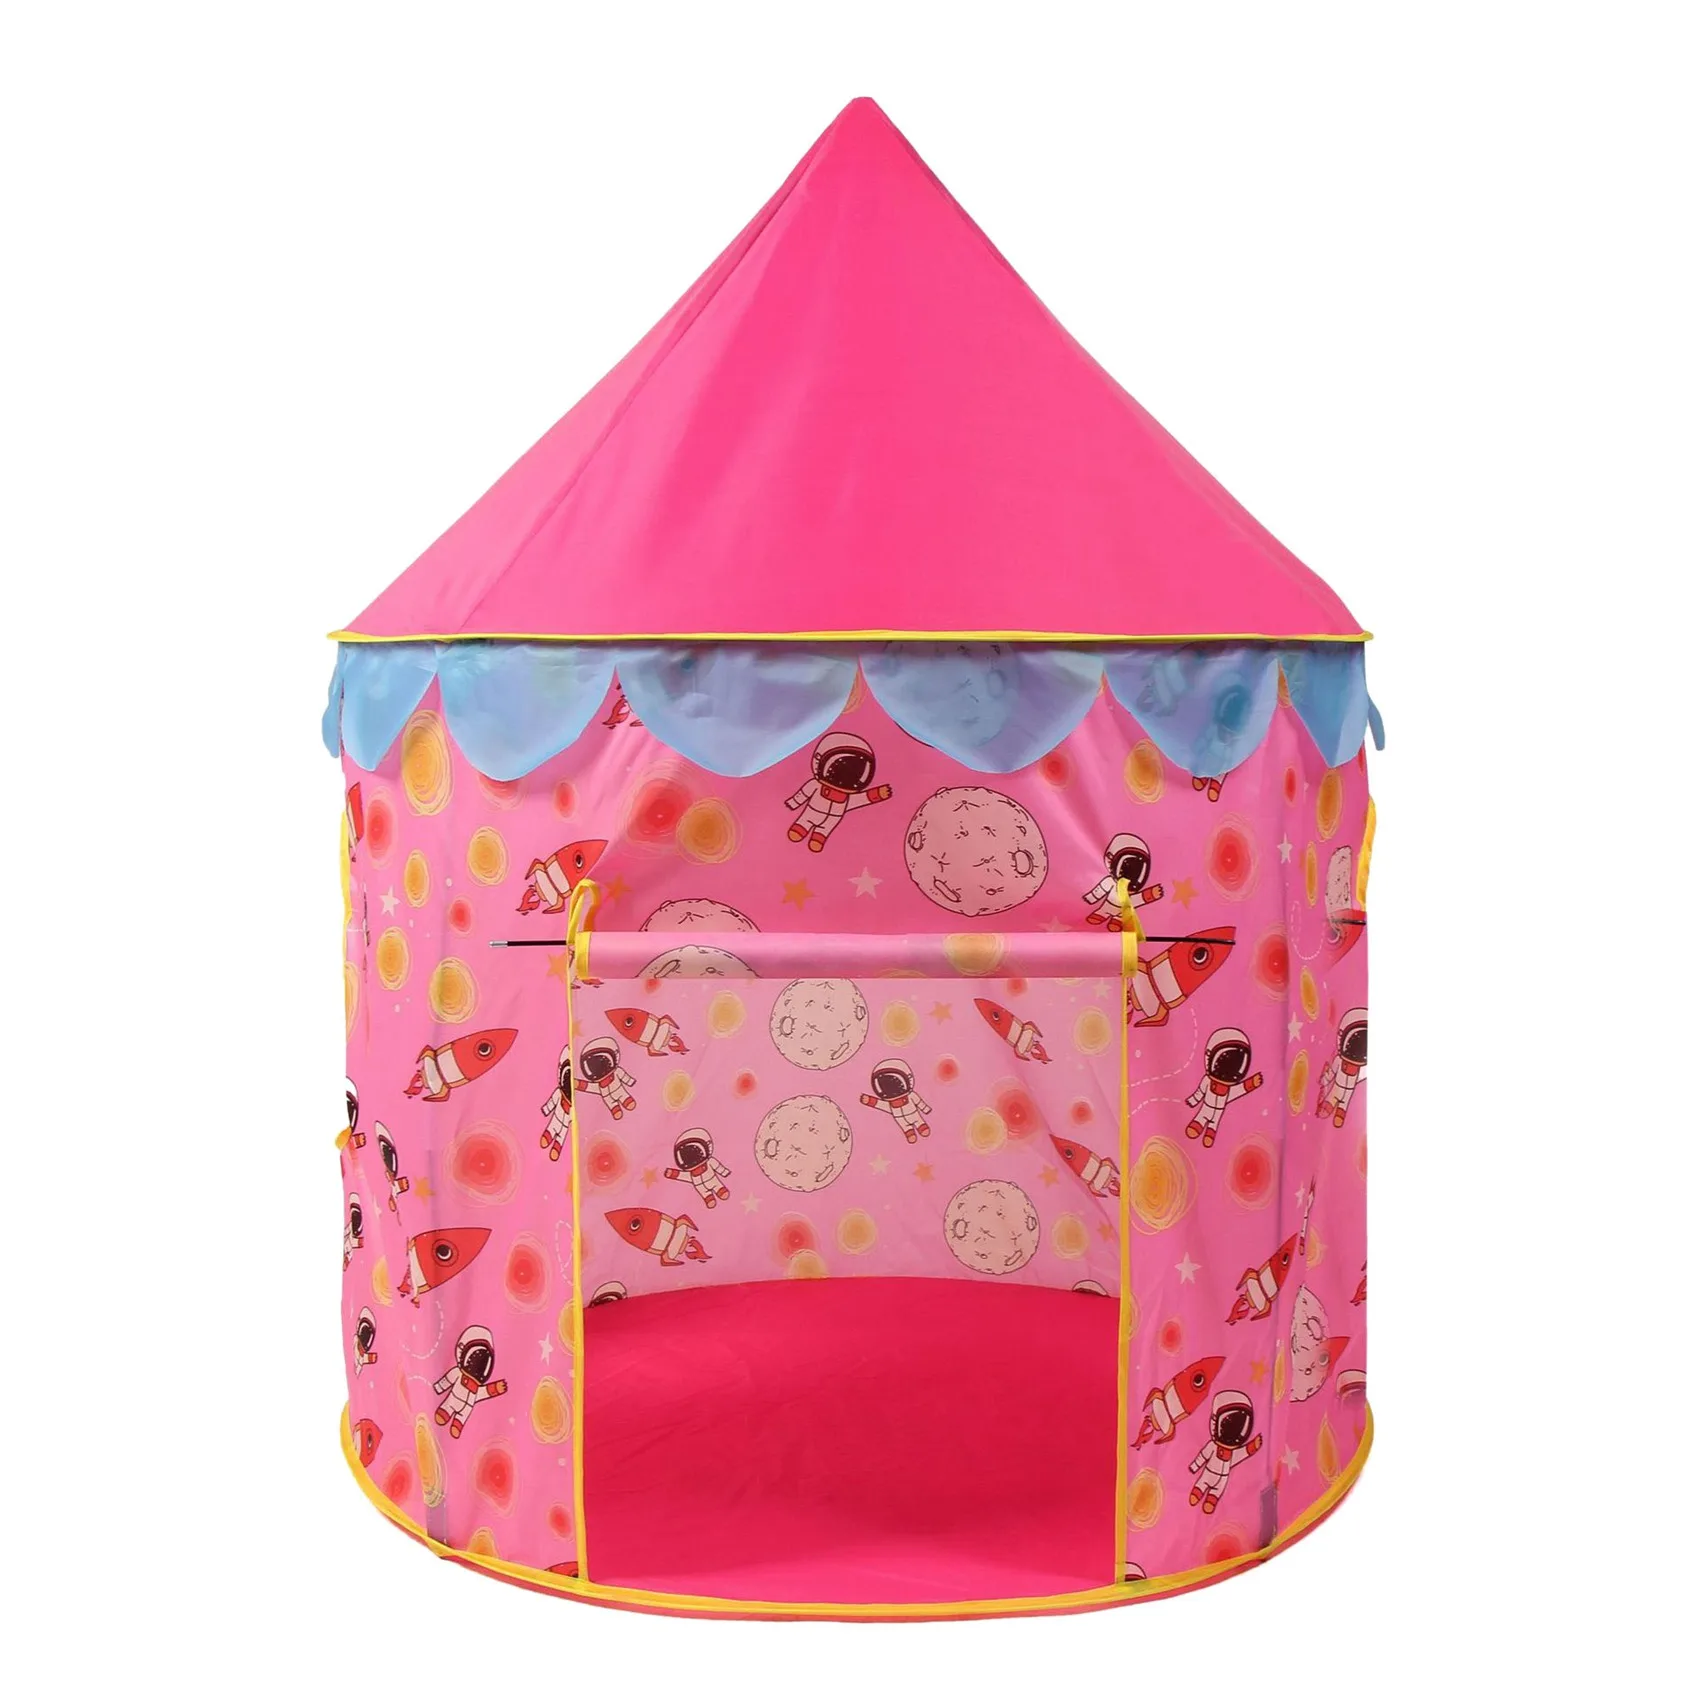 

Baby Children Castle Playhouse Indoor Outdoor Home Bedroom Hut Toy Portable Ball Pool Game House Kids Play Tent Pink